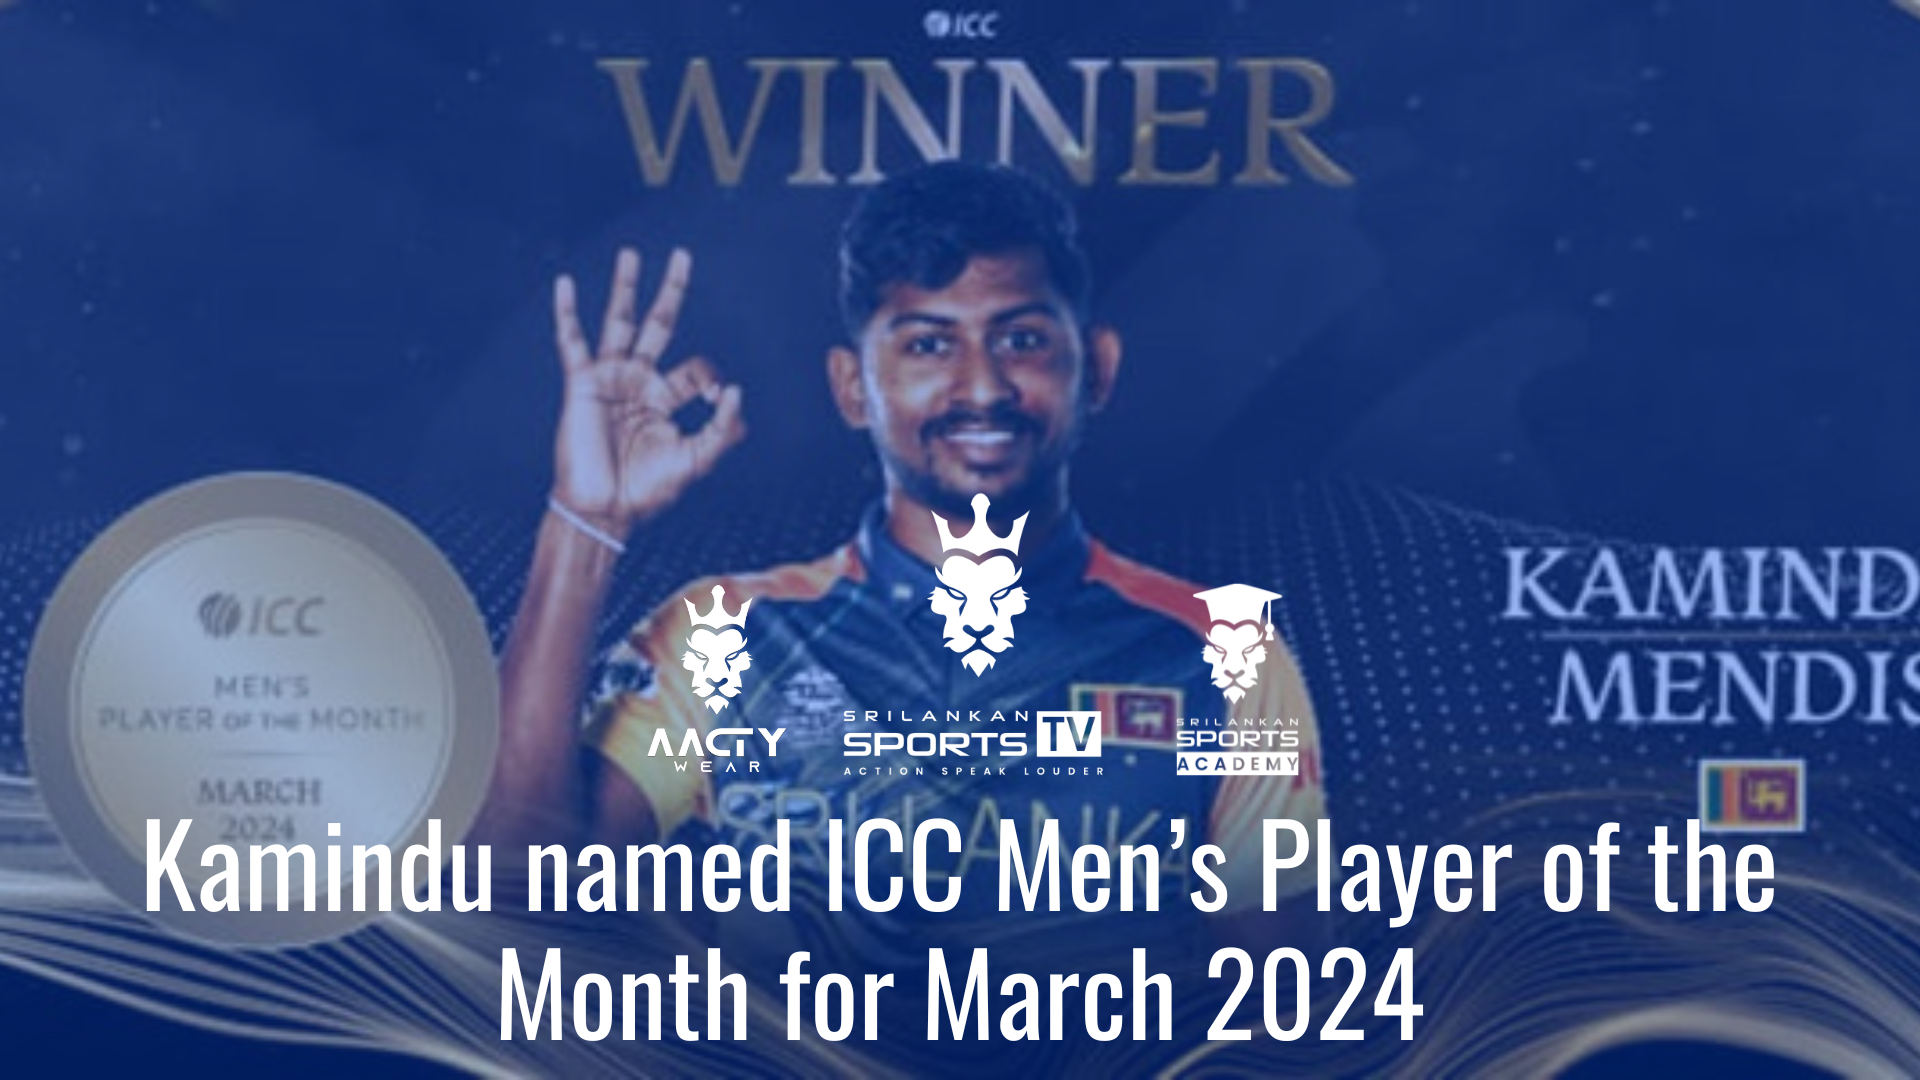 Kamindu named ICC Men’s Player of the Month for March 2024